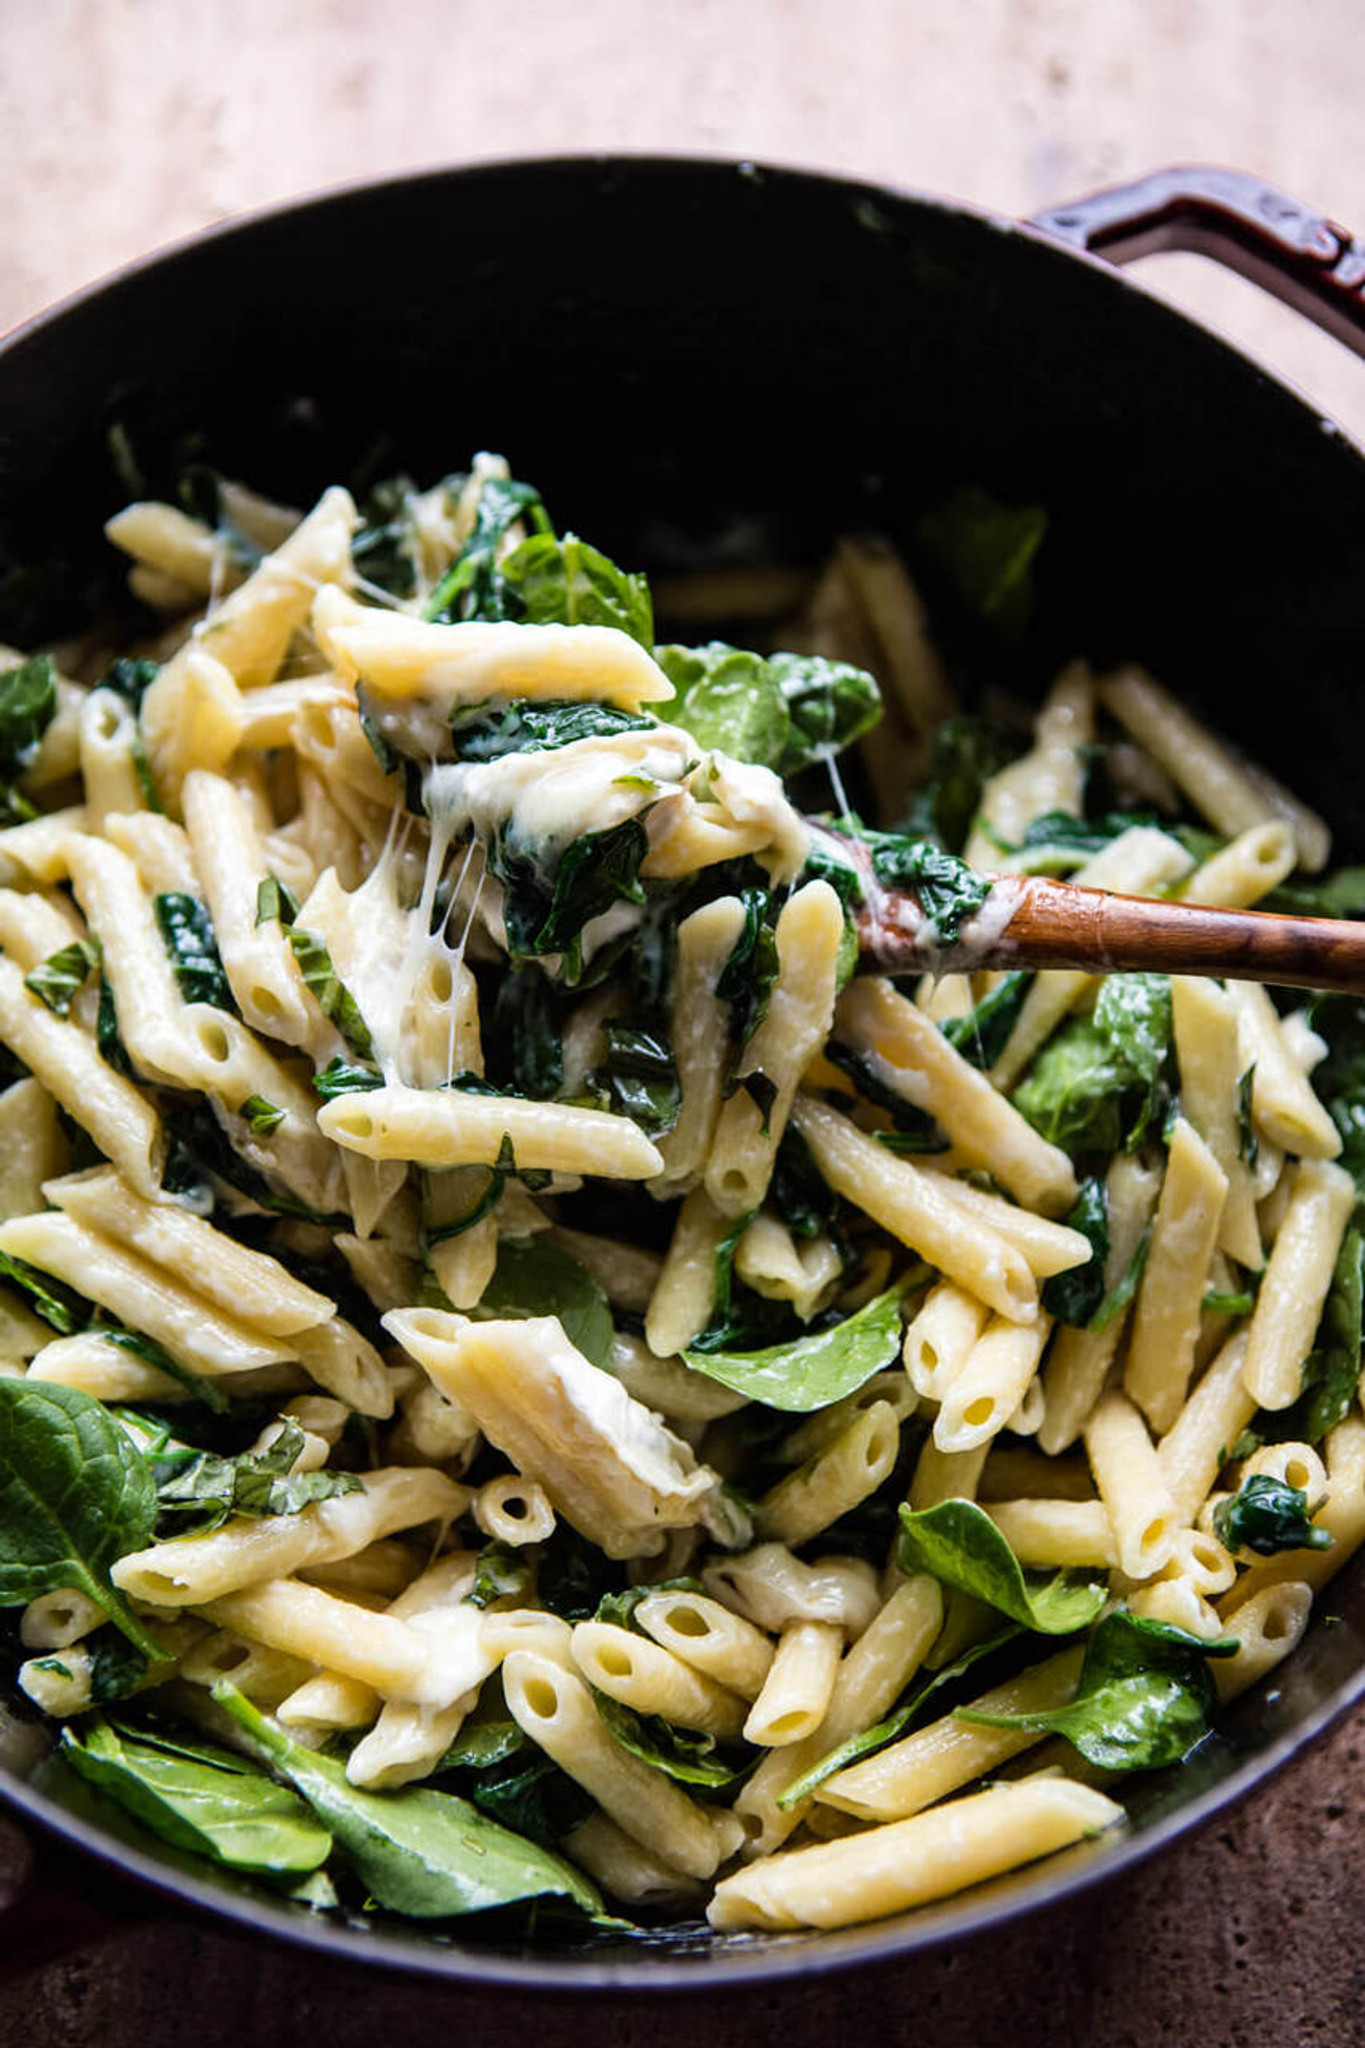 Lemony Spinach and Artichoke Brie Penne Pasta with Pine Nuts